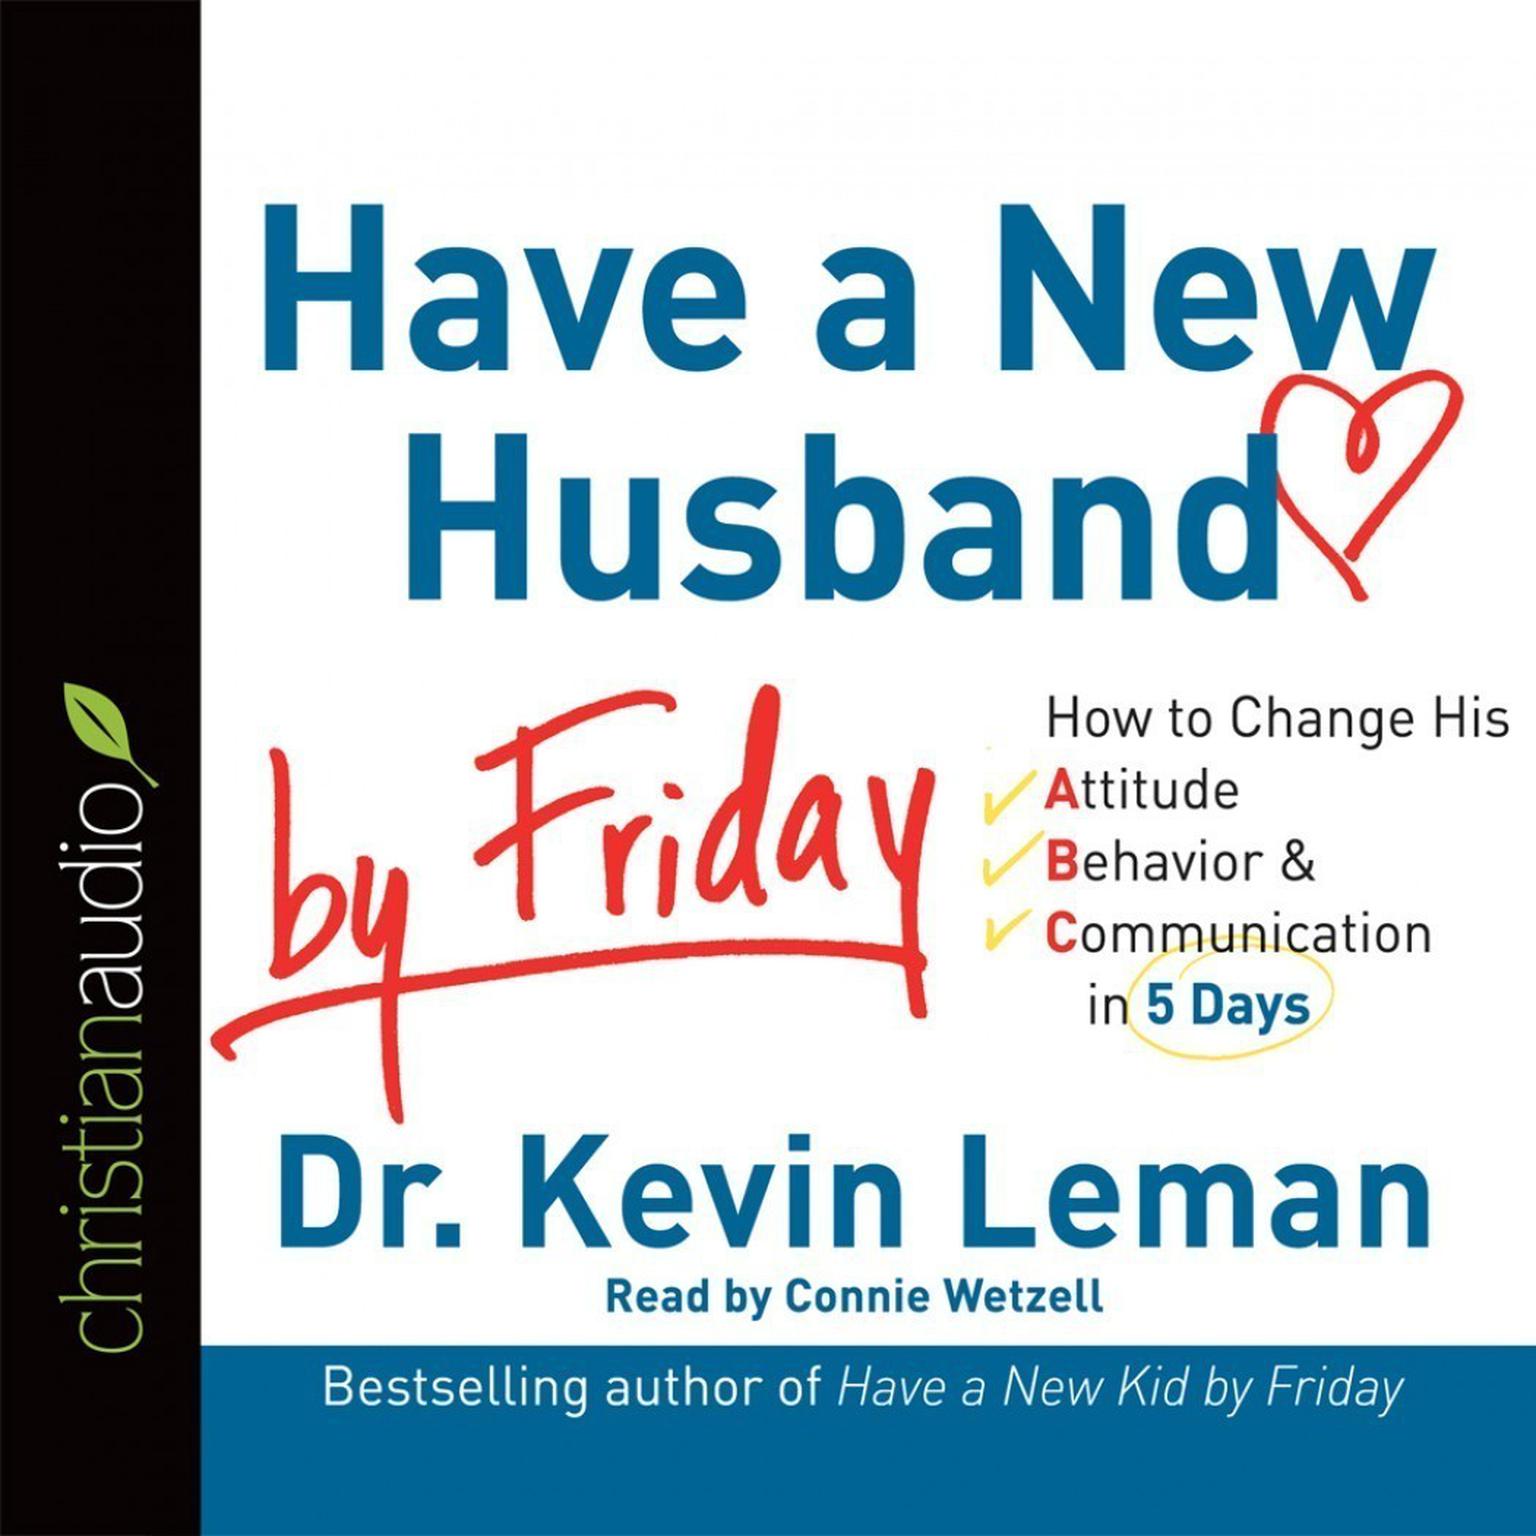 Have a New Husband by Friday (Abridged): How to Change His Attitude, Behavior & Communication in 5 Days Audiobook, by Kevin Leman